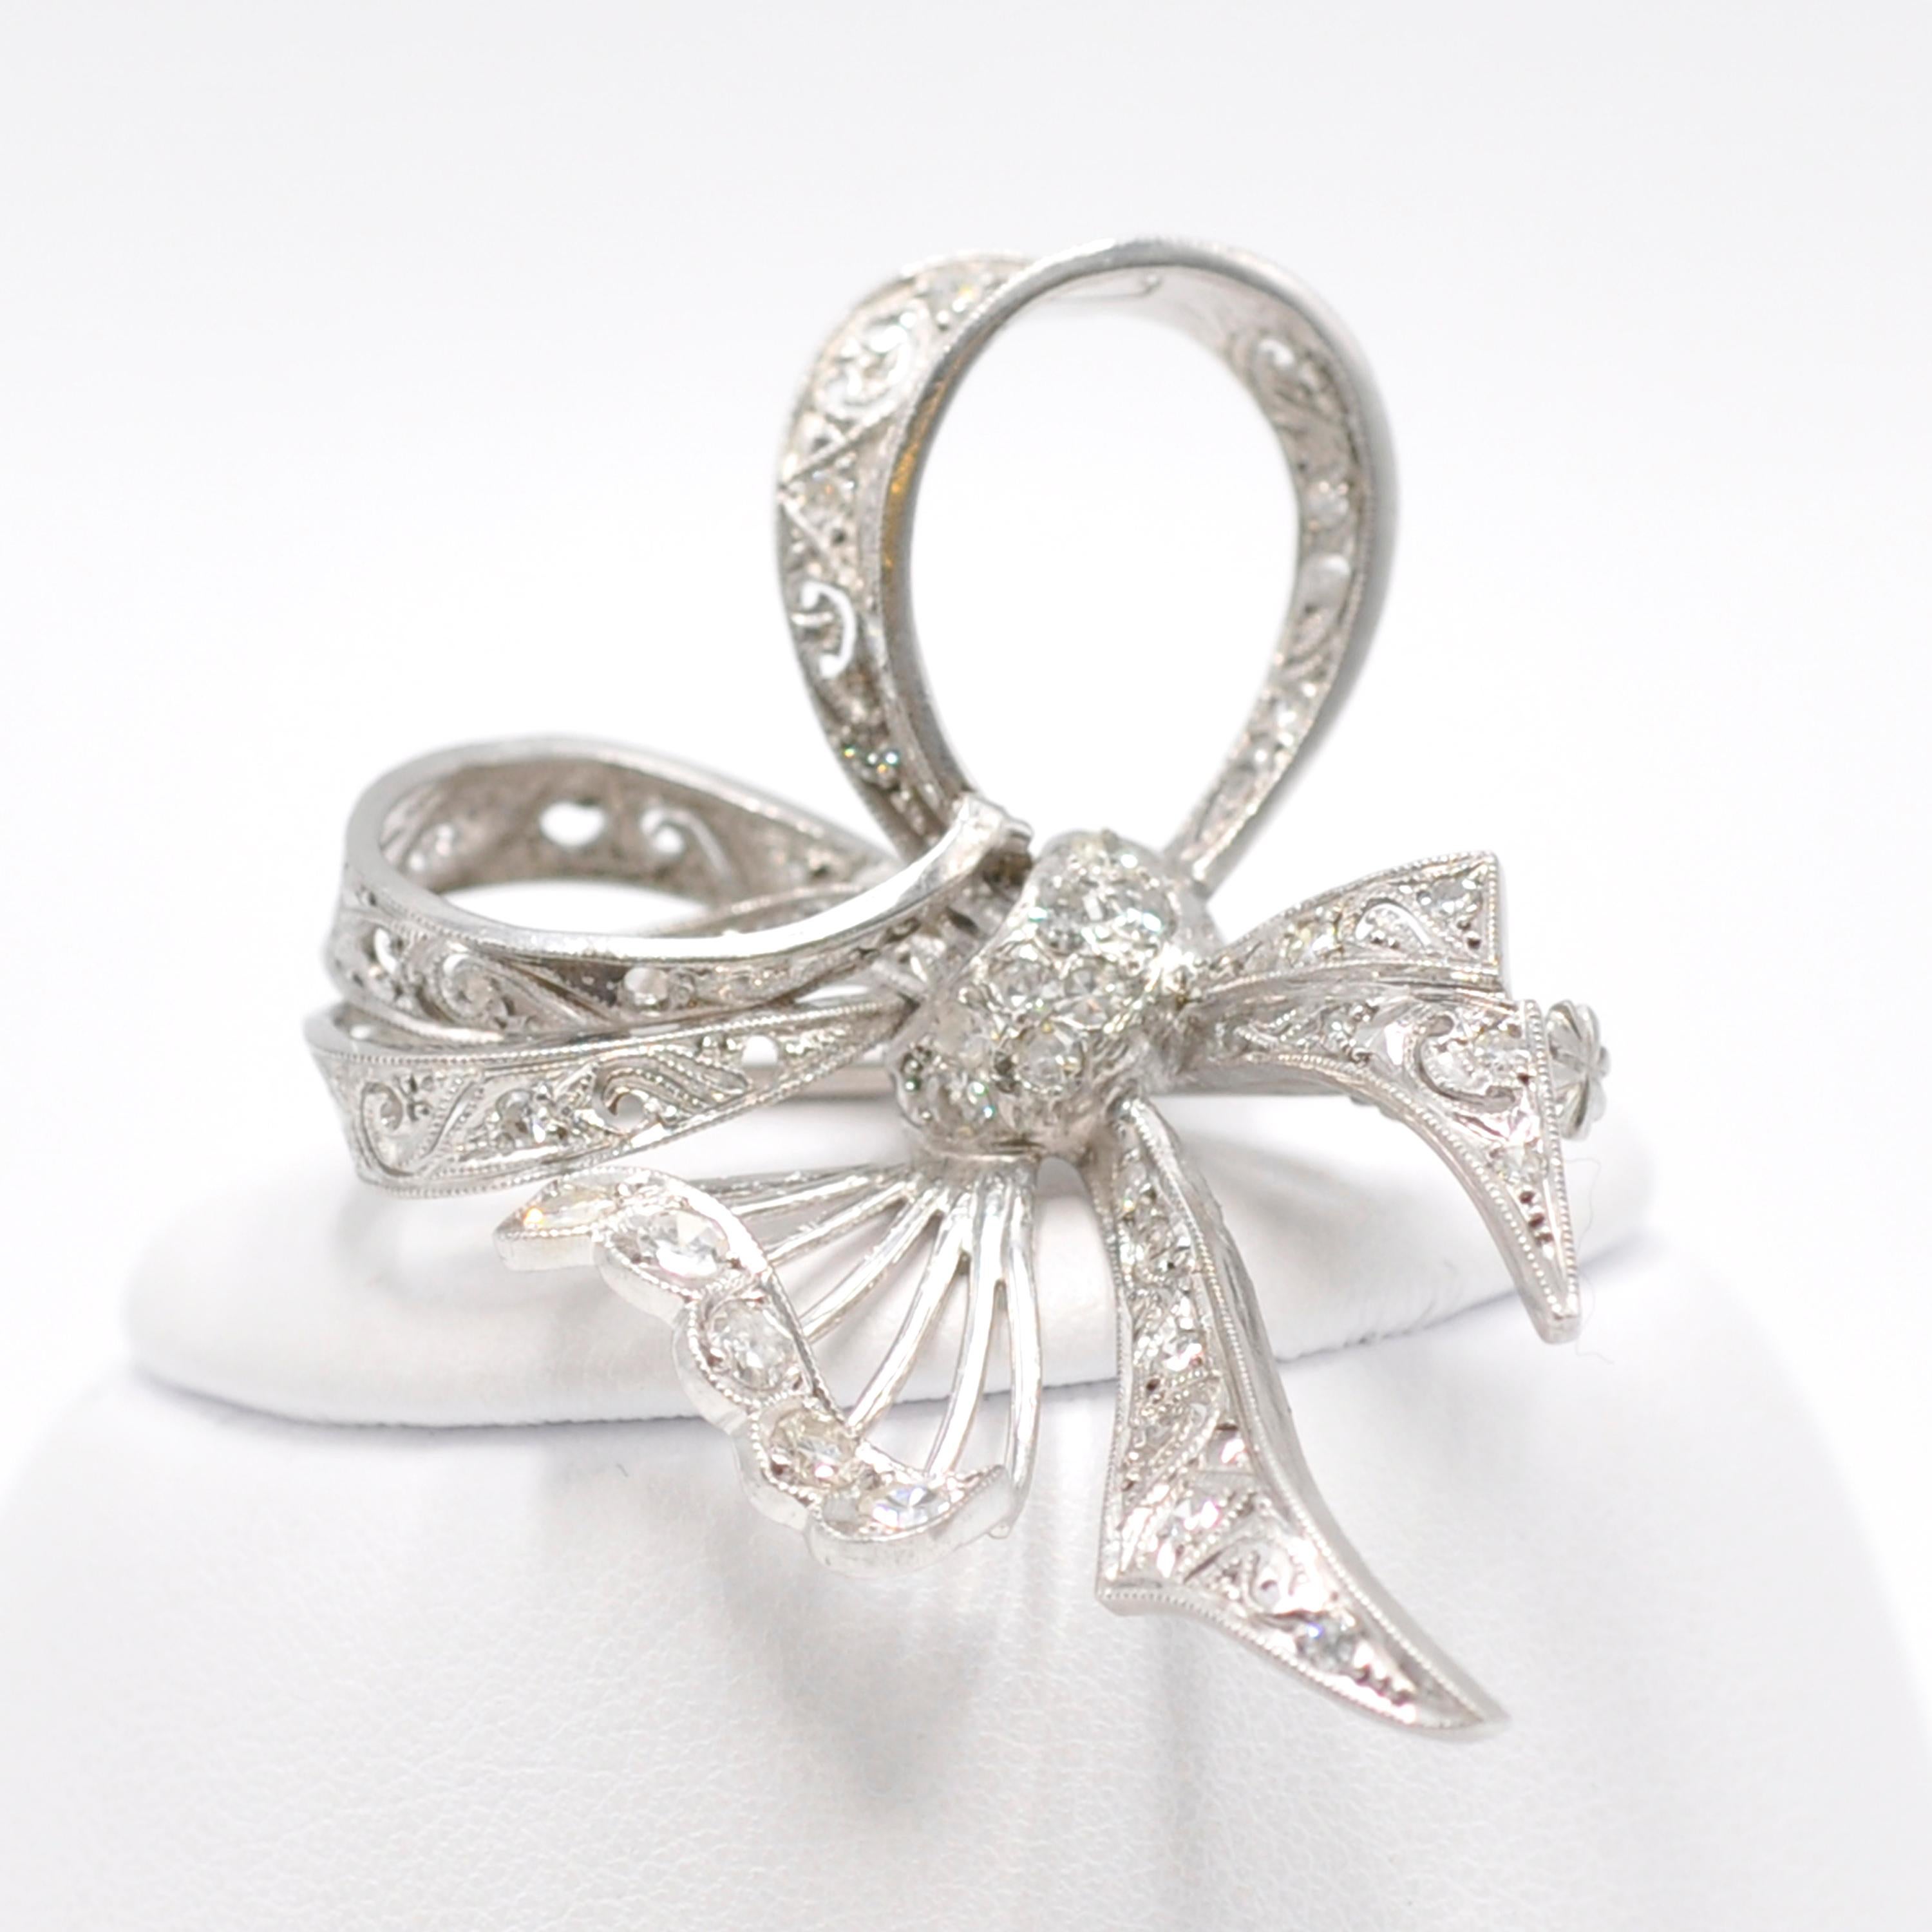 Compliment your favorite dress or sweater with this elegant vintage platinum diamond bow pin. The curves of the bow twist themselves to suggest a butterfly and are accented by the scroll design on the ribbons.
1 carat of diamonds are sprinkled